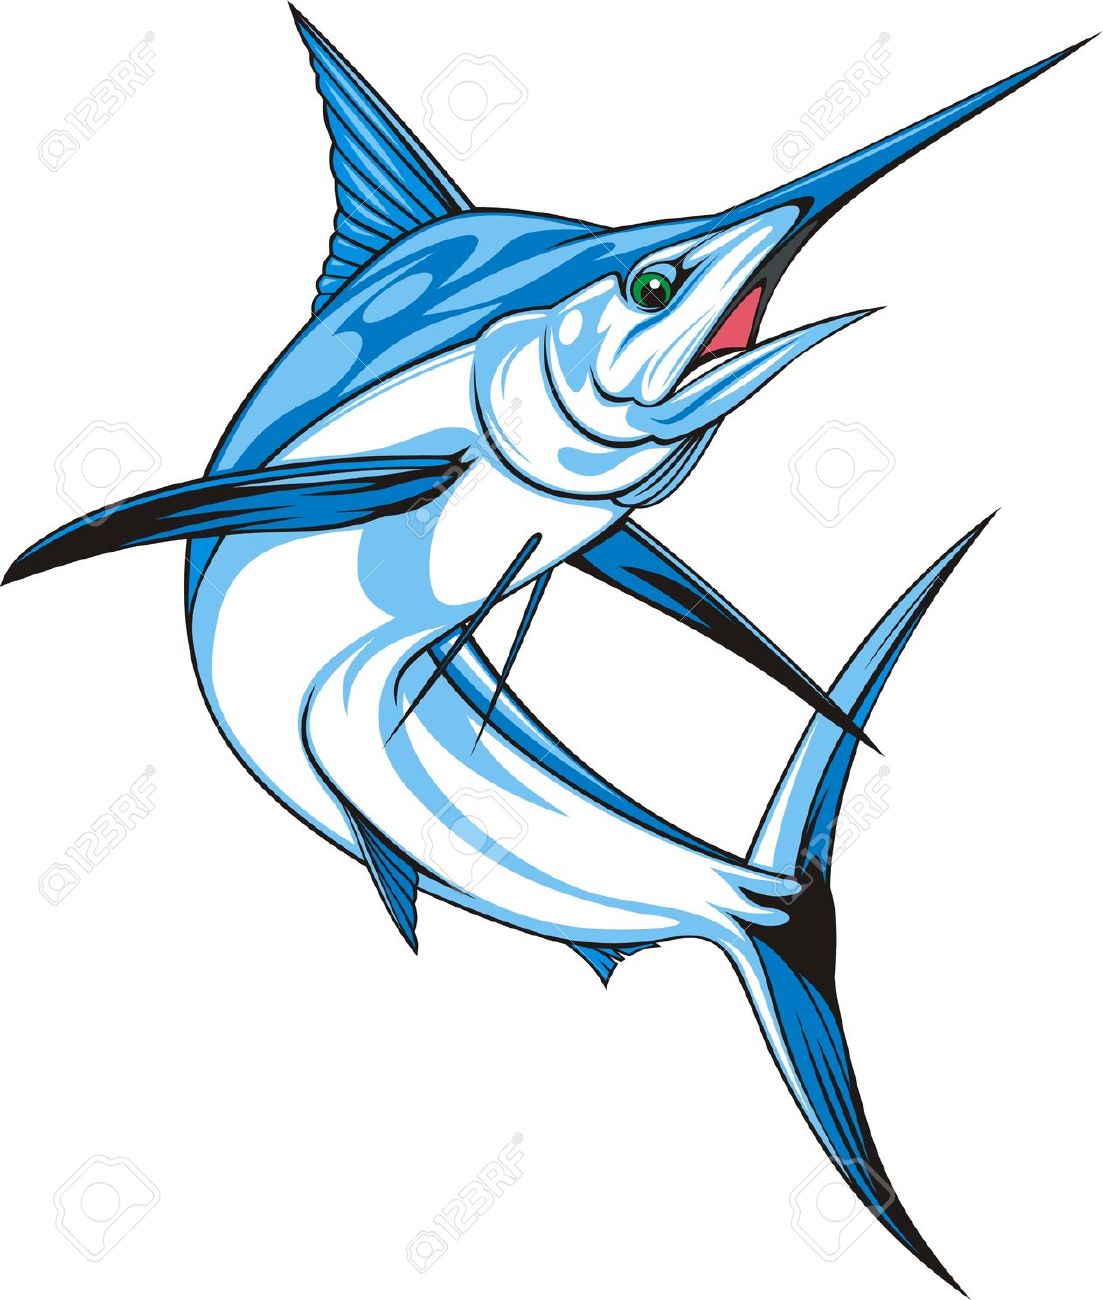 sailfish: natural blue marlin on the white background